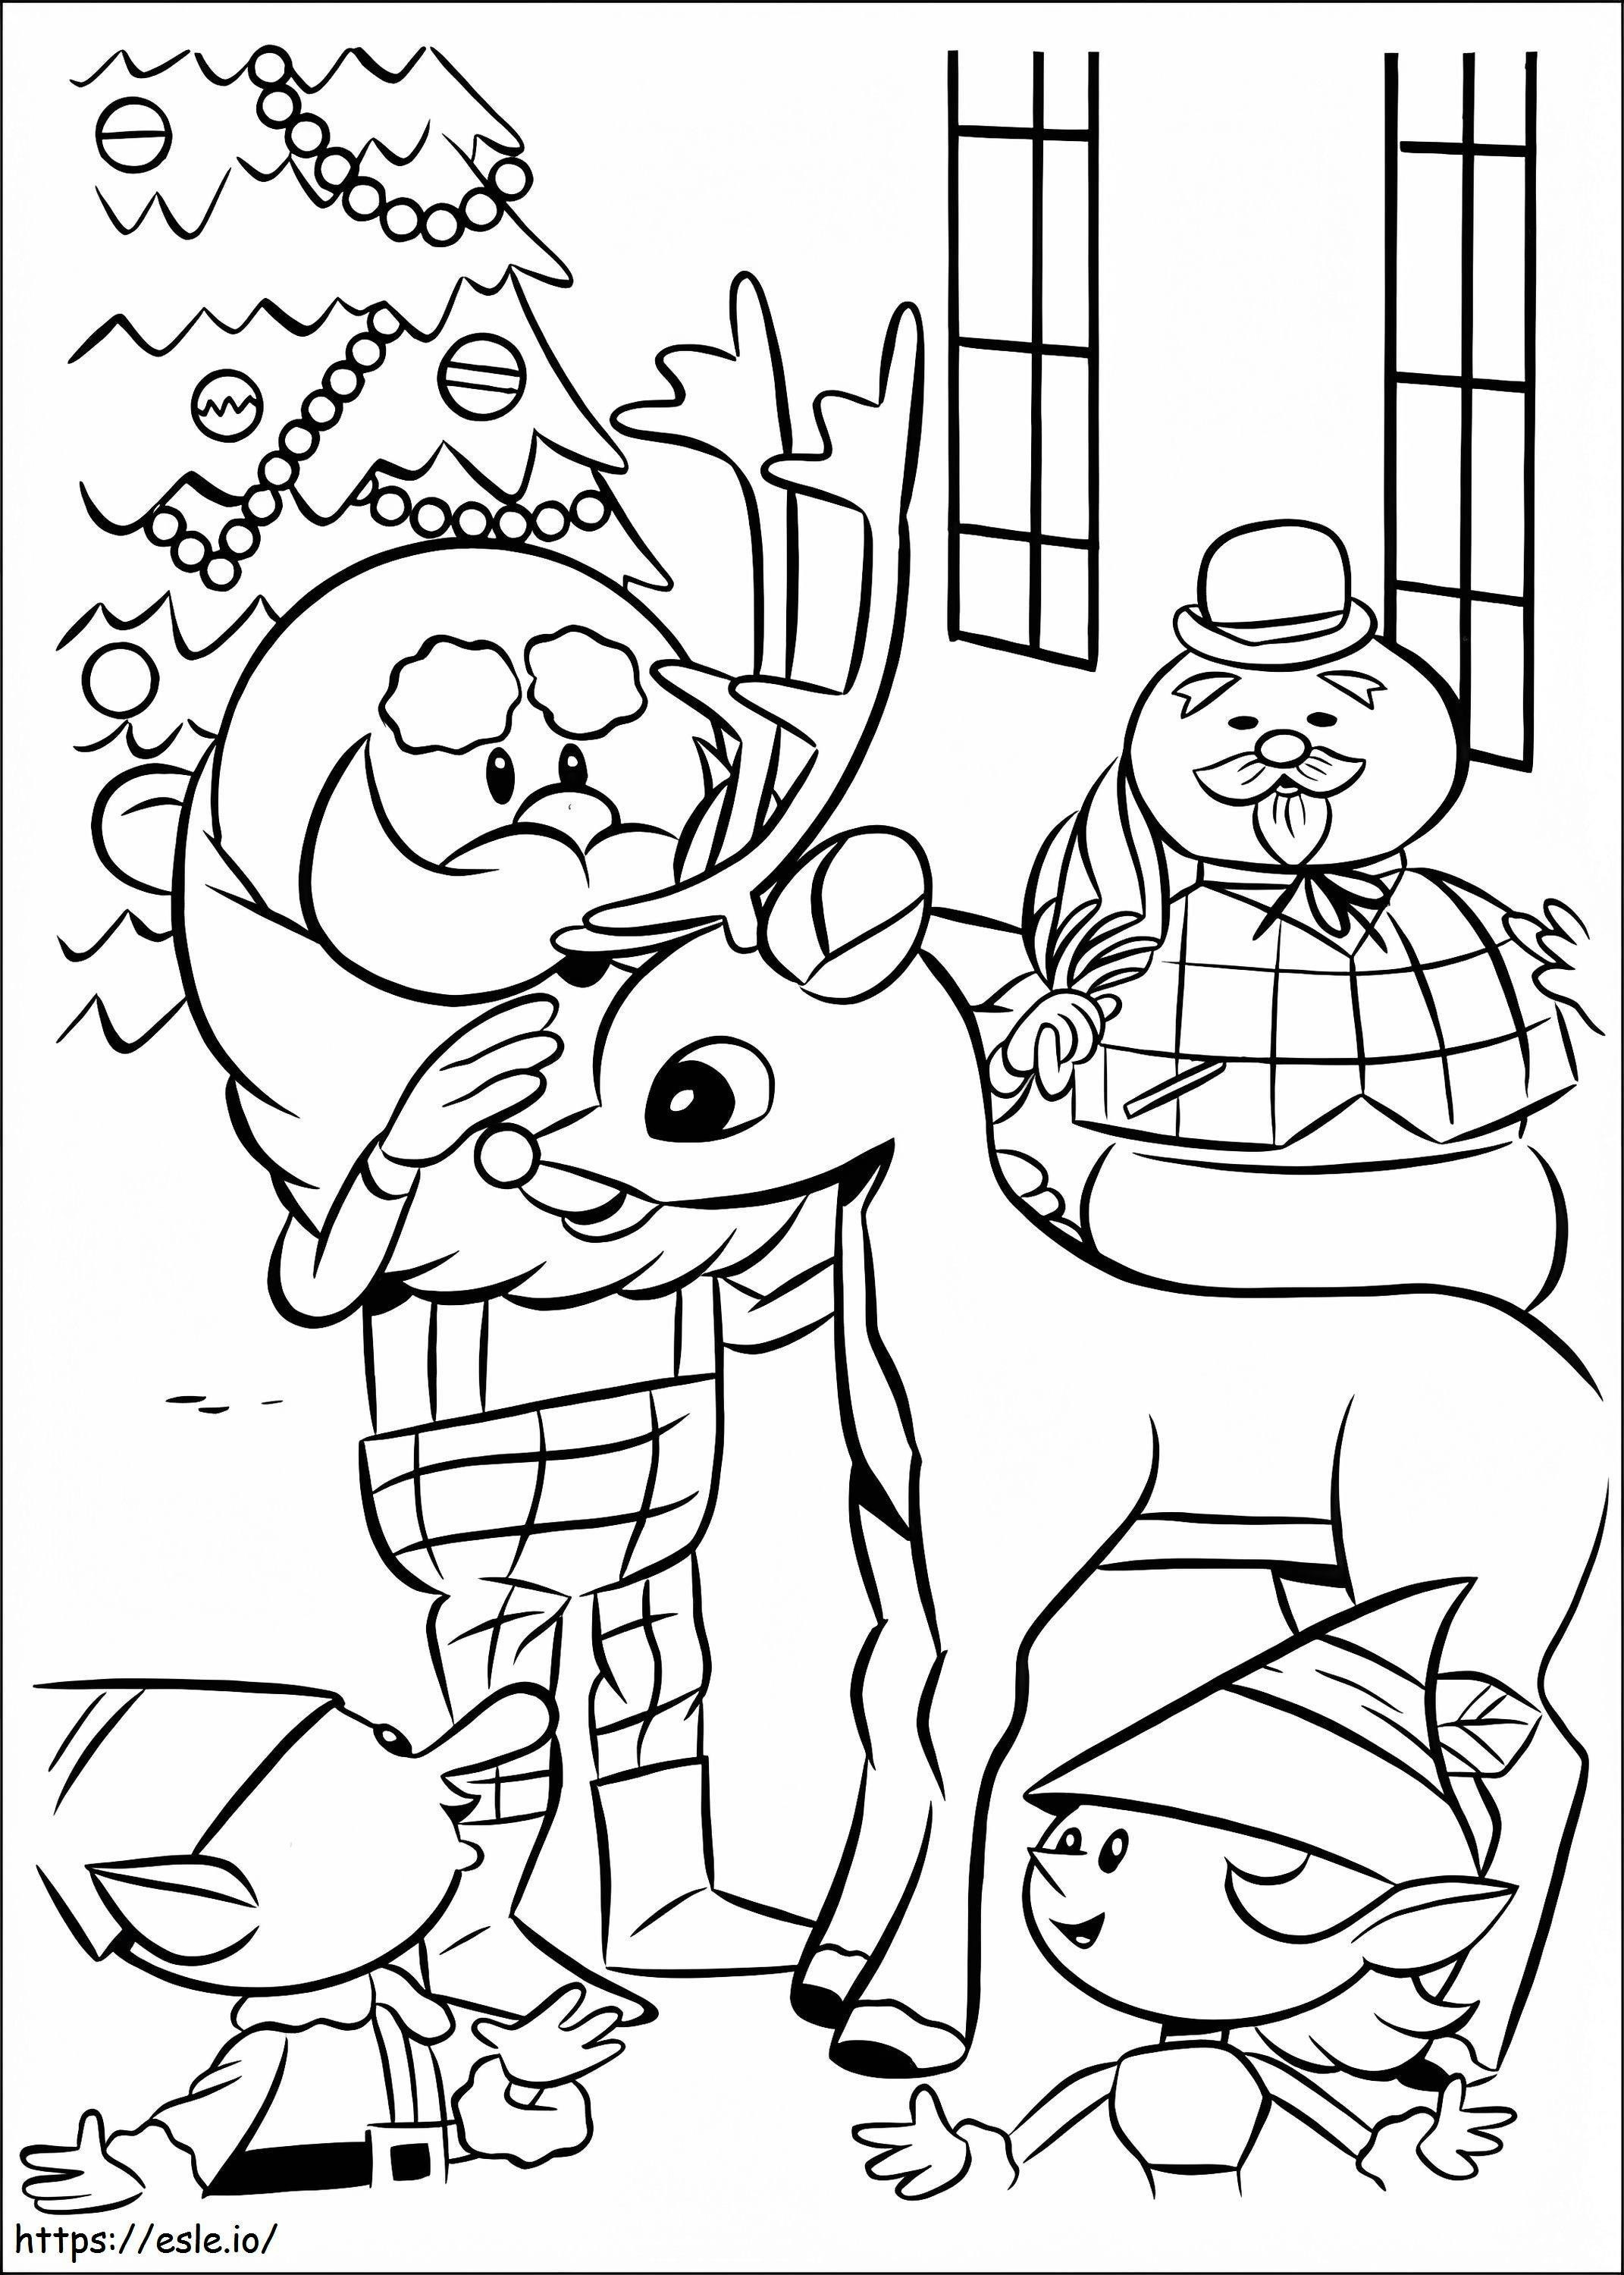 Character From Rudolph 1 coloring page